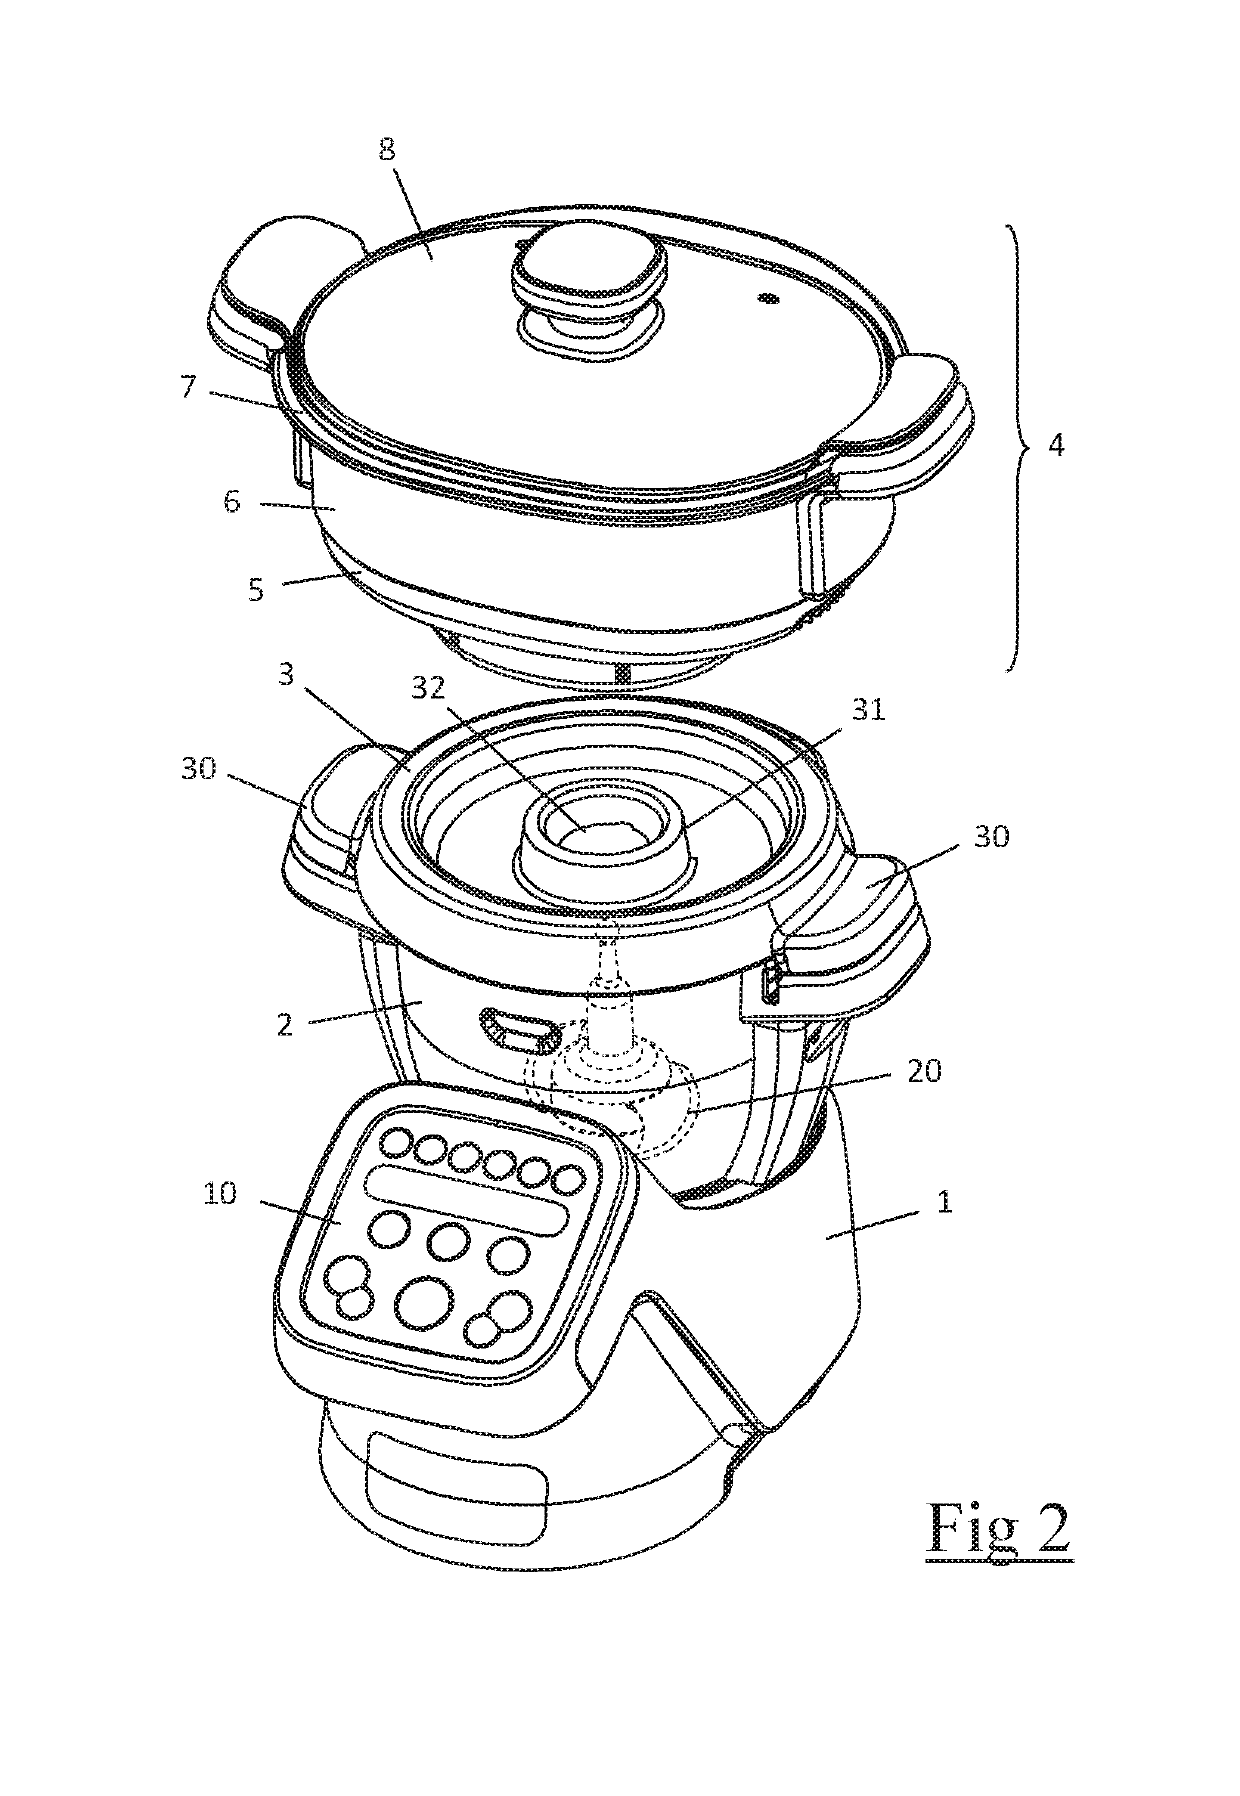 Steaming accessory comprising a receptacle for collecting condensates designed to rest on a mixing bowl of a household appliance